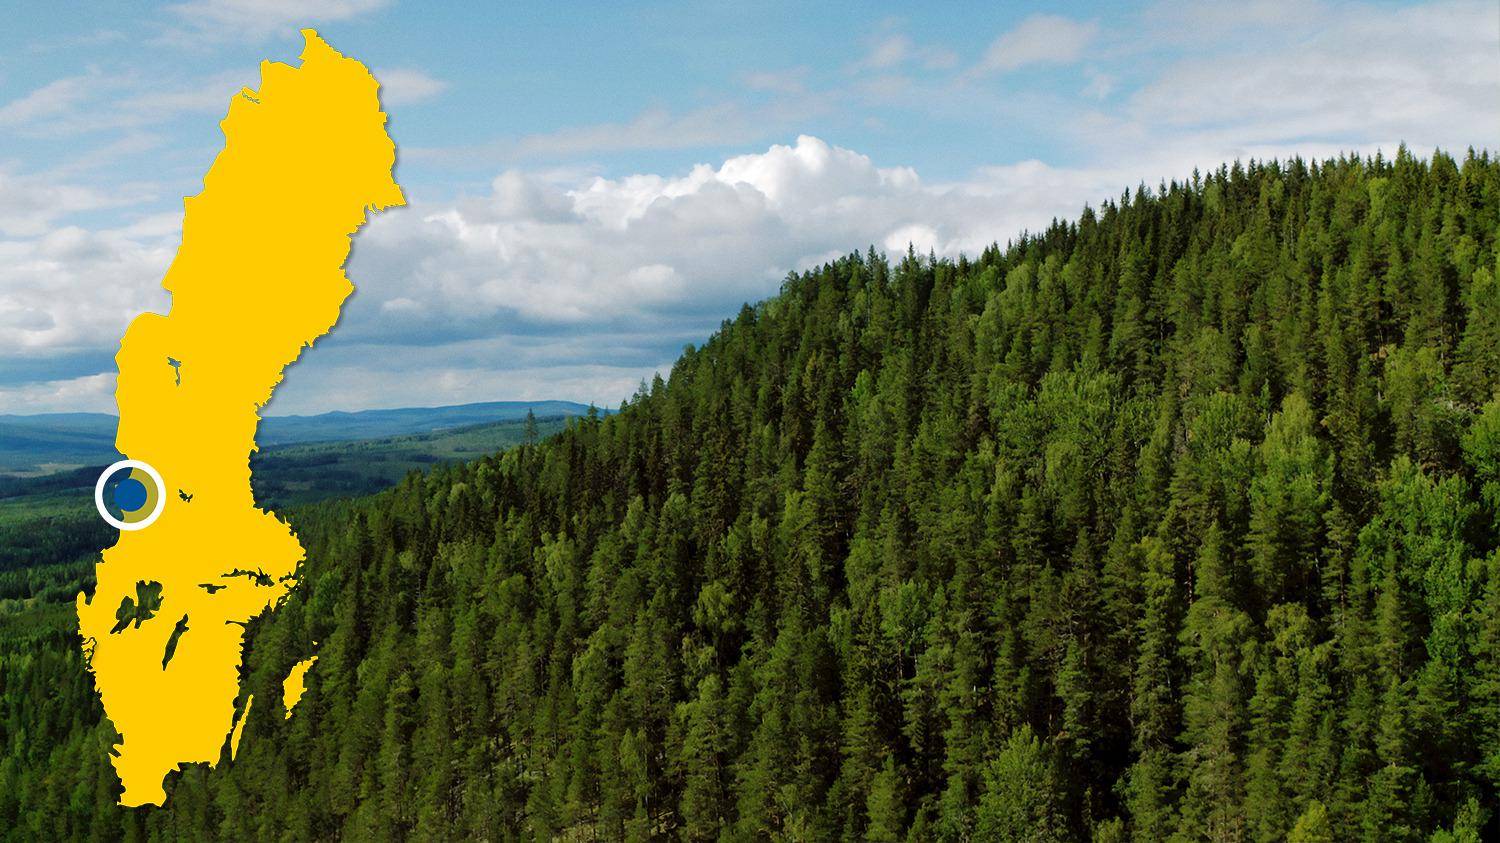 A view of a green coniferous forest. In the picture, there is a yellow map of Sweden with a blue dot that marks Höljes.